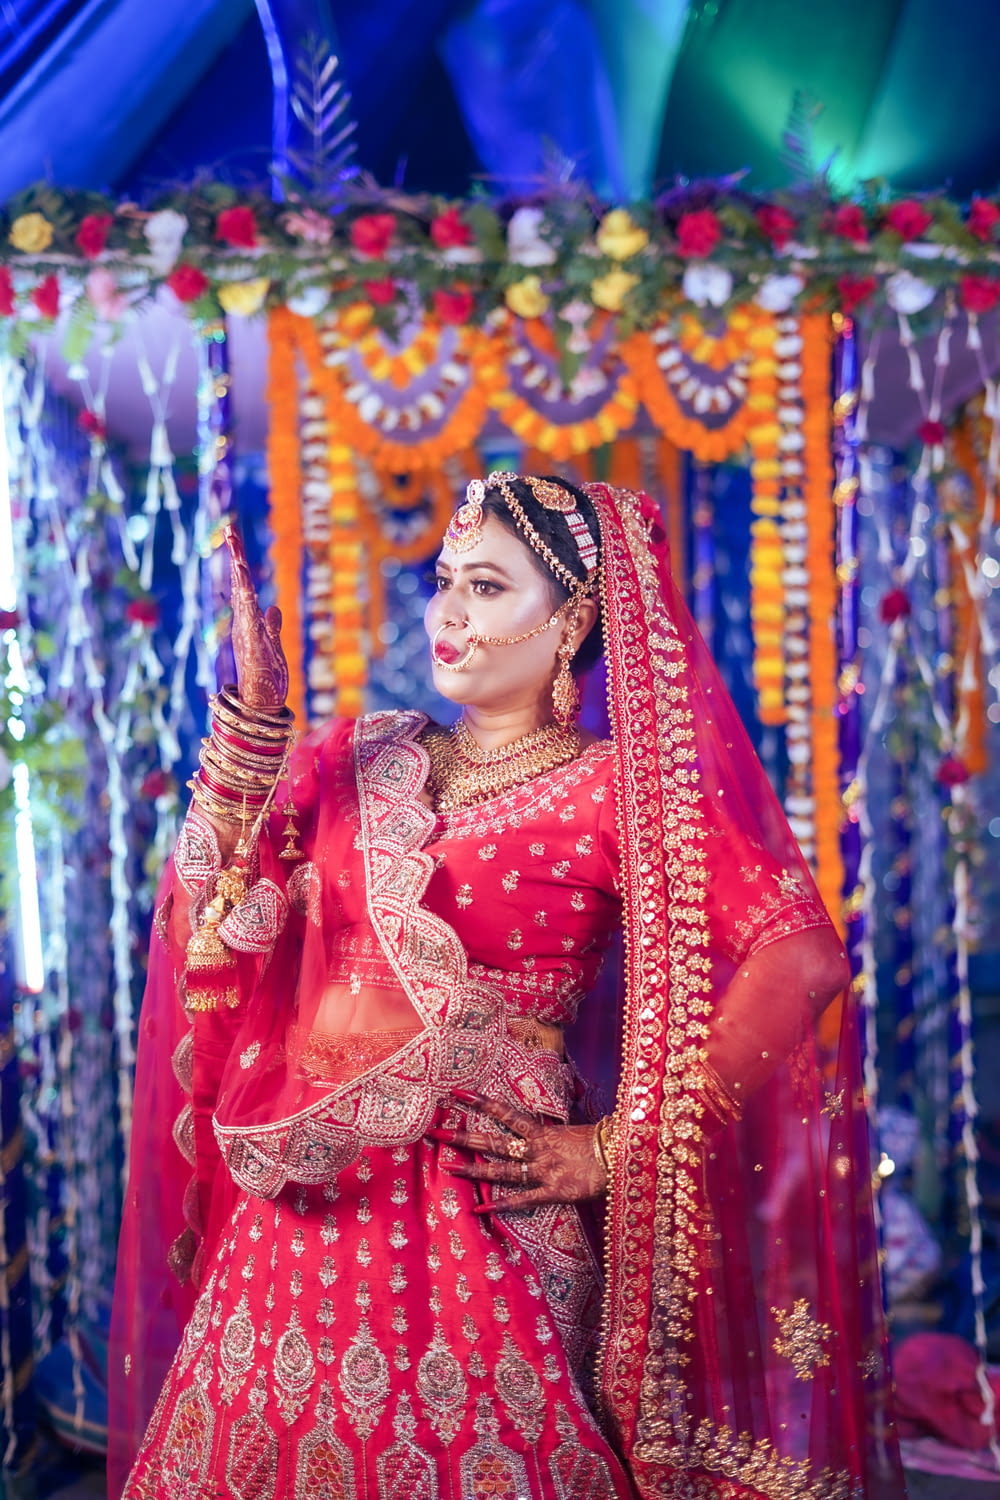 a woman dressed in a red and gold bridal outfit